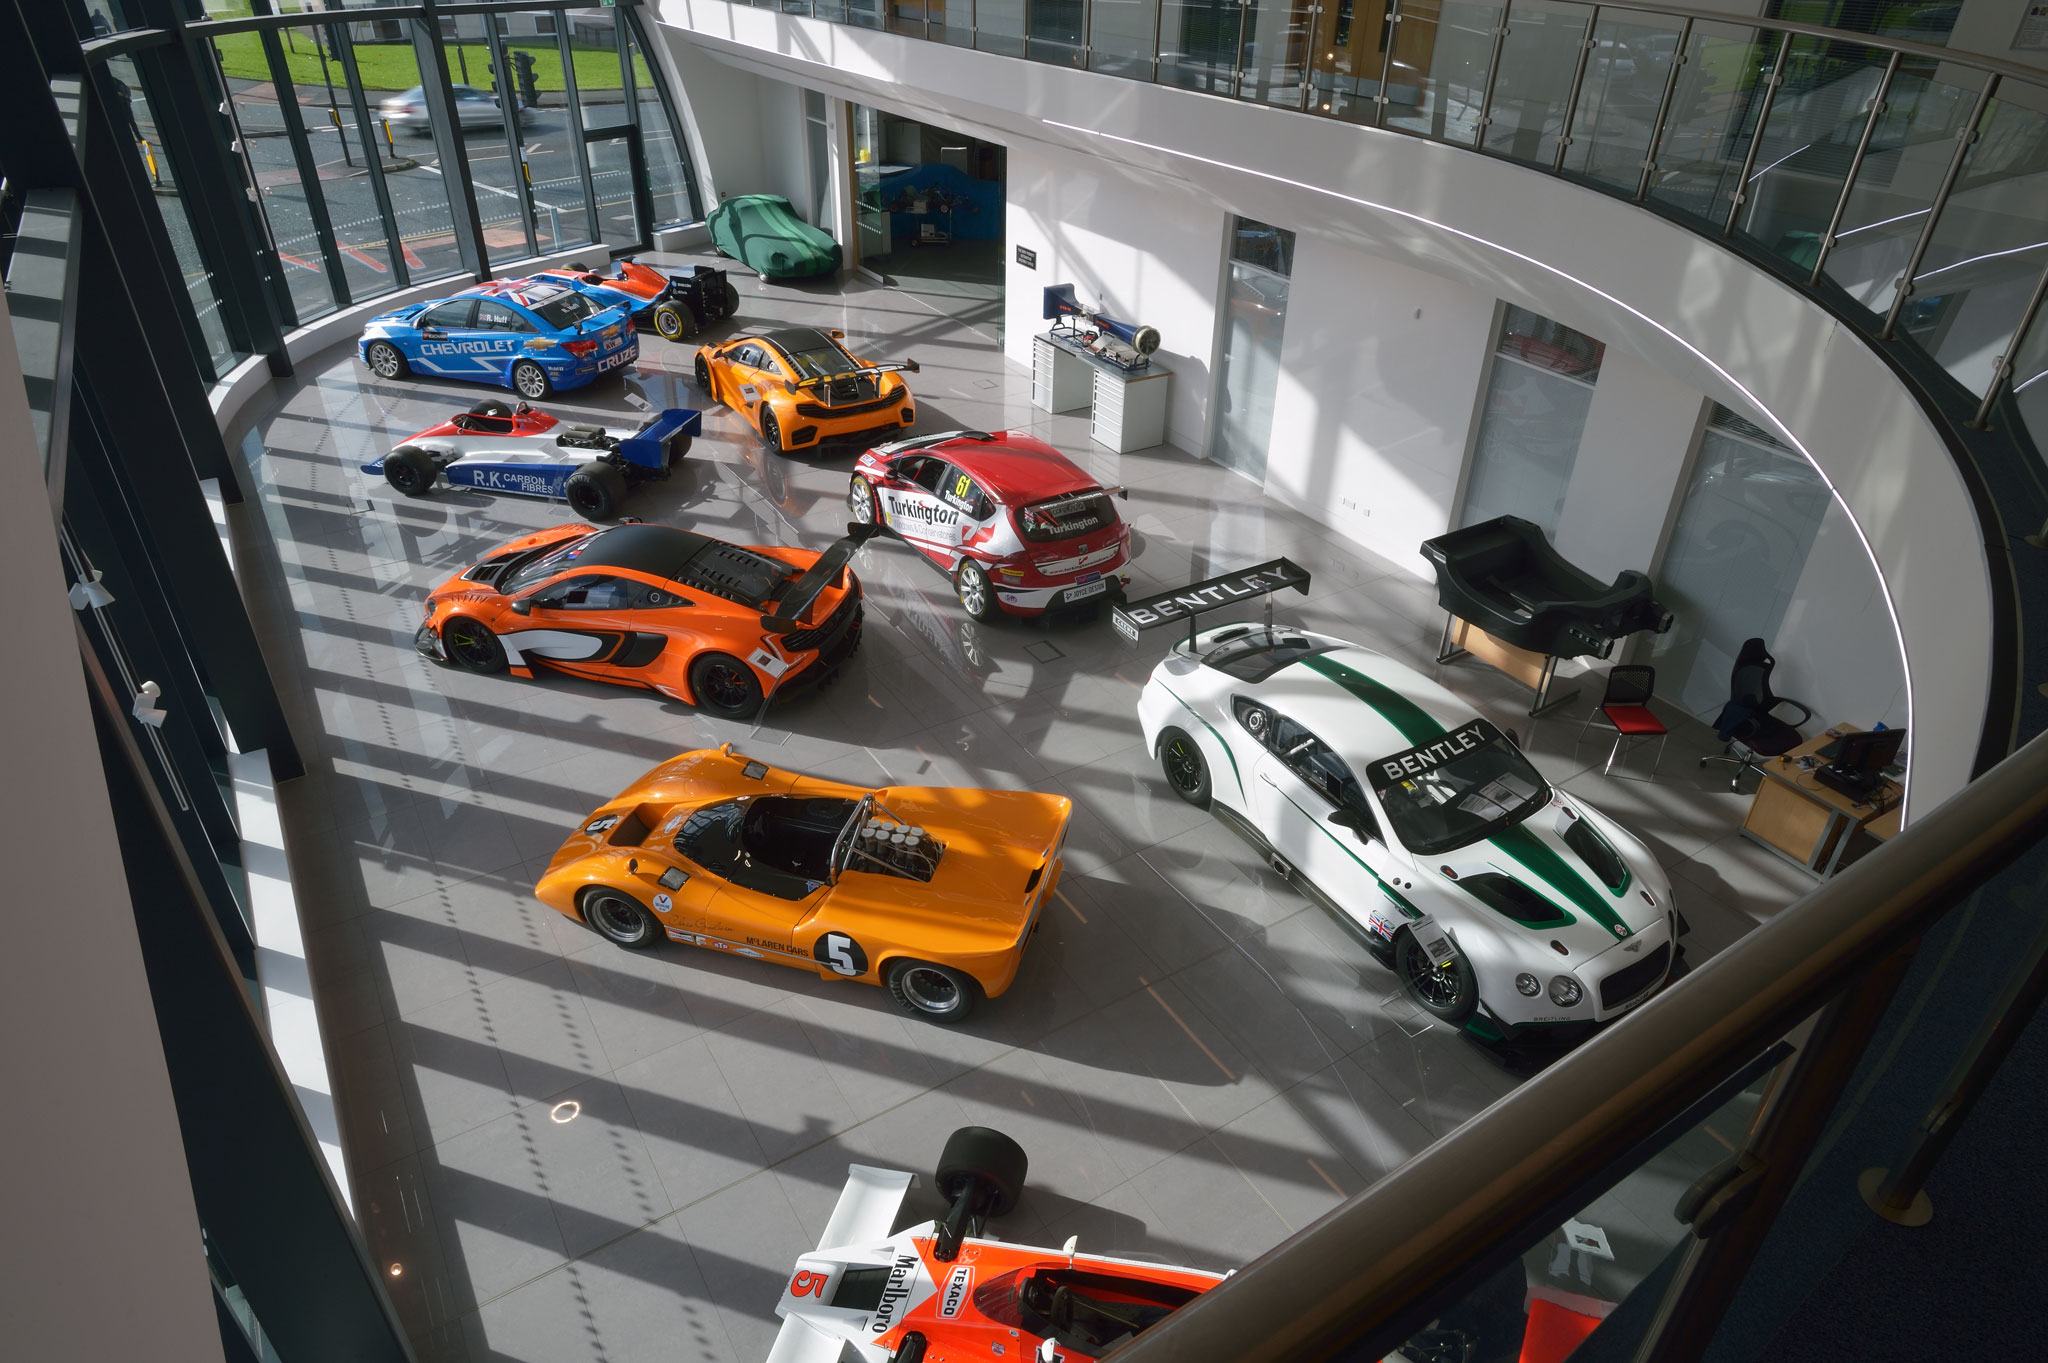 Racecars on display in the Atrium at the National Centre for Motorsport Engineering, University of Bolton